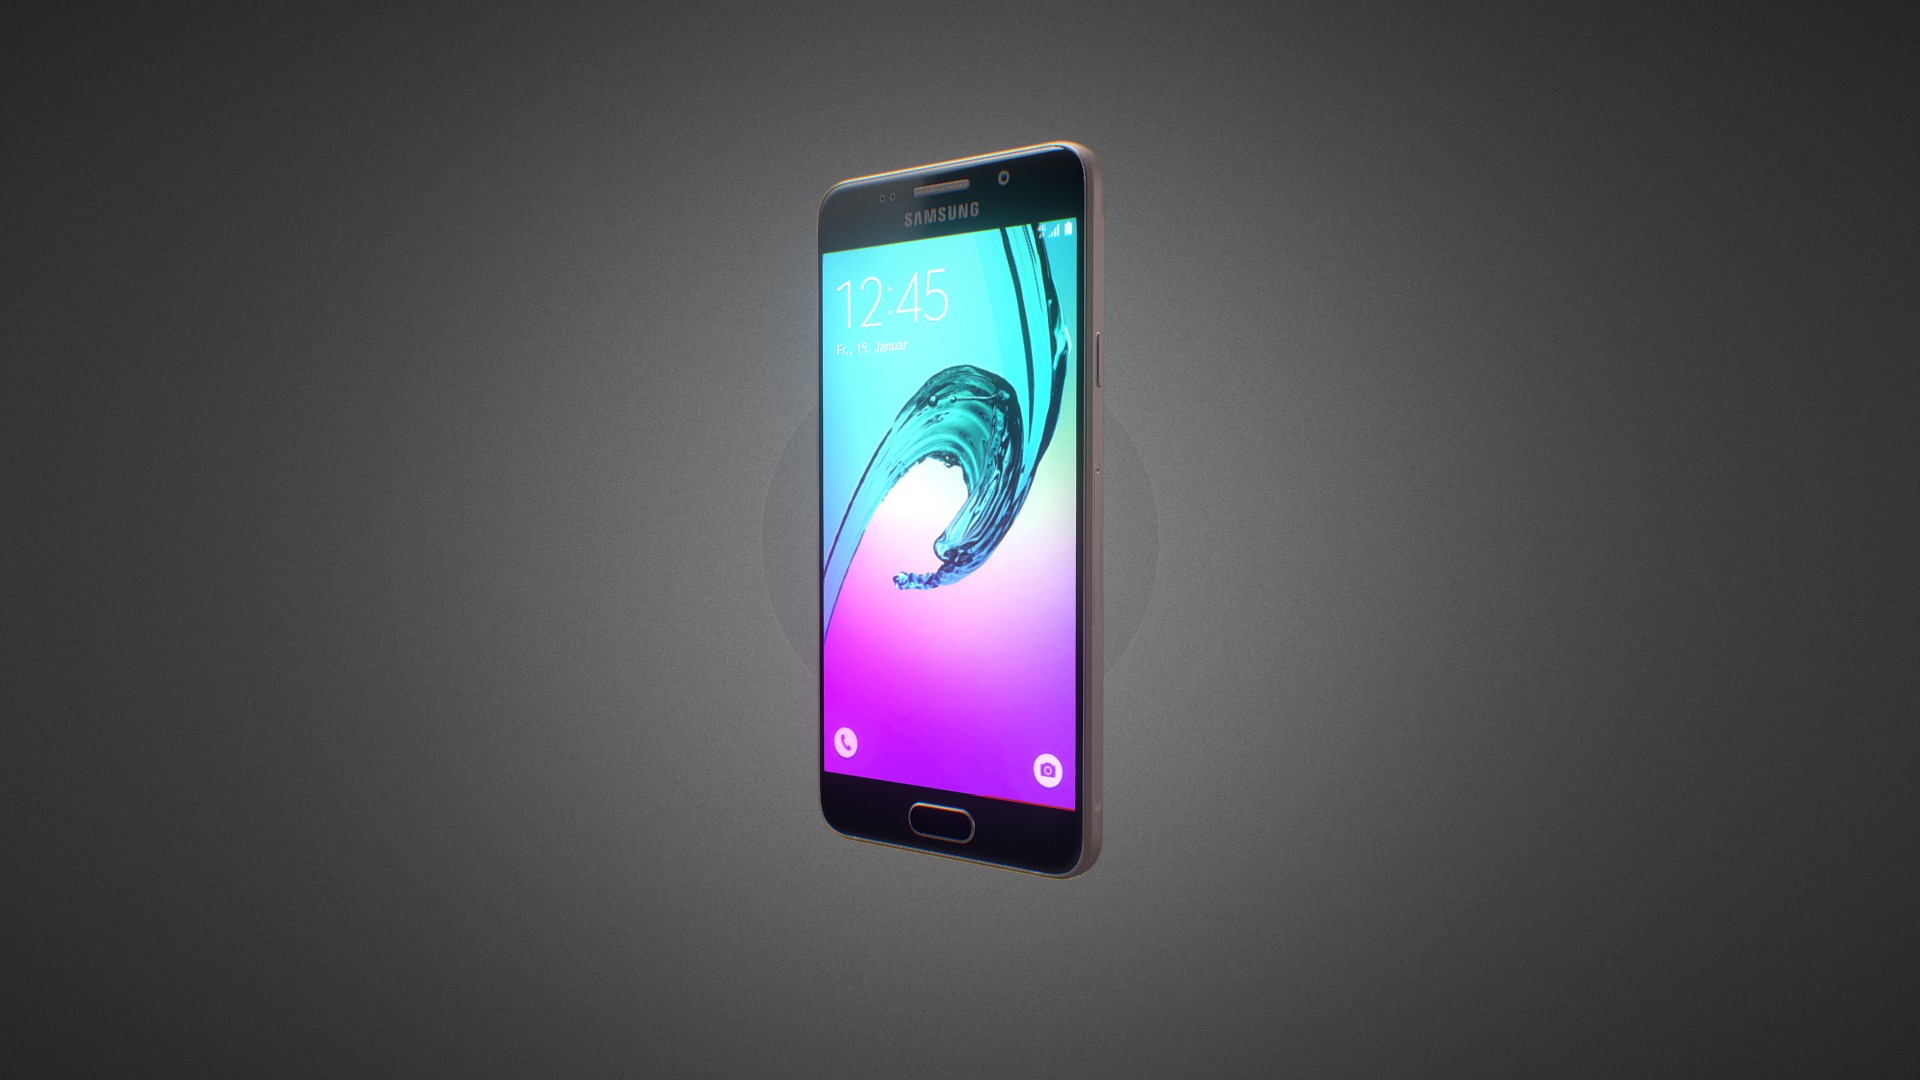 3D model Samsung Galaxy A3 2016 for Element 3D - This is a 3D model of the Samsung Galaxy A3 2016 for Element 3D. The 3D model is about a cell phone with a blue screen.